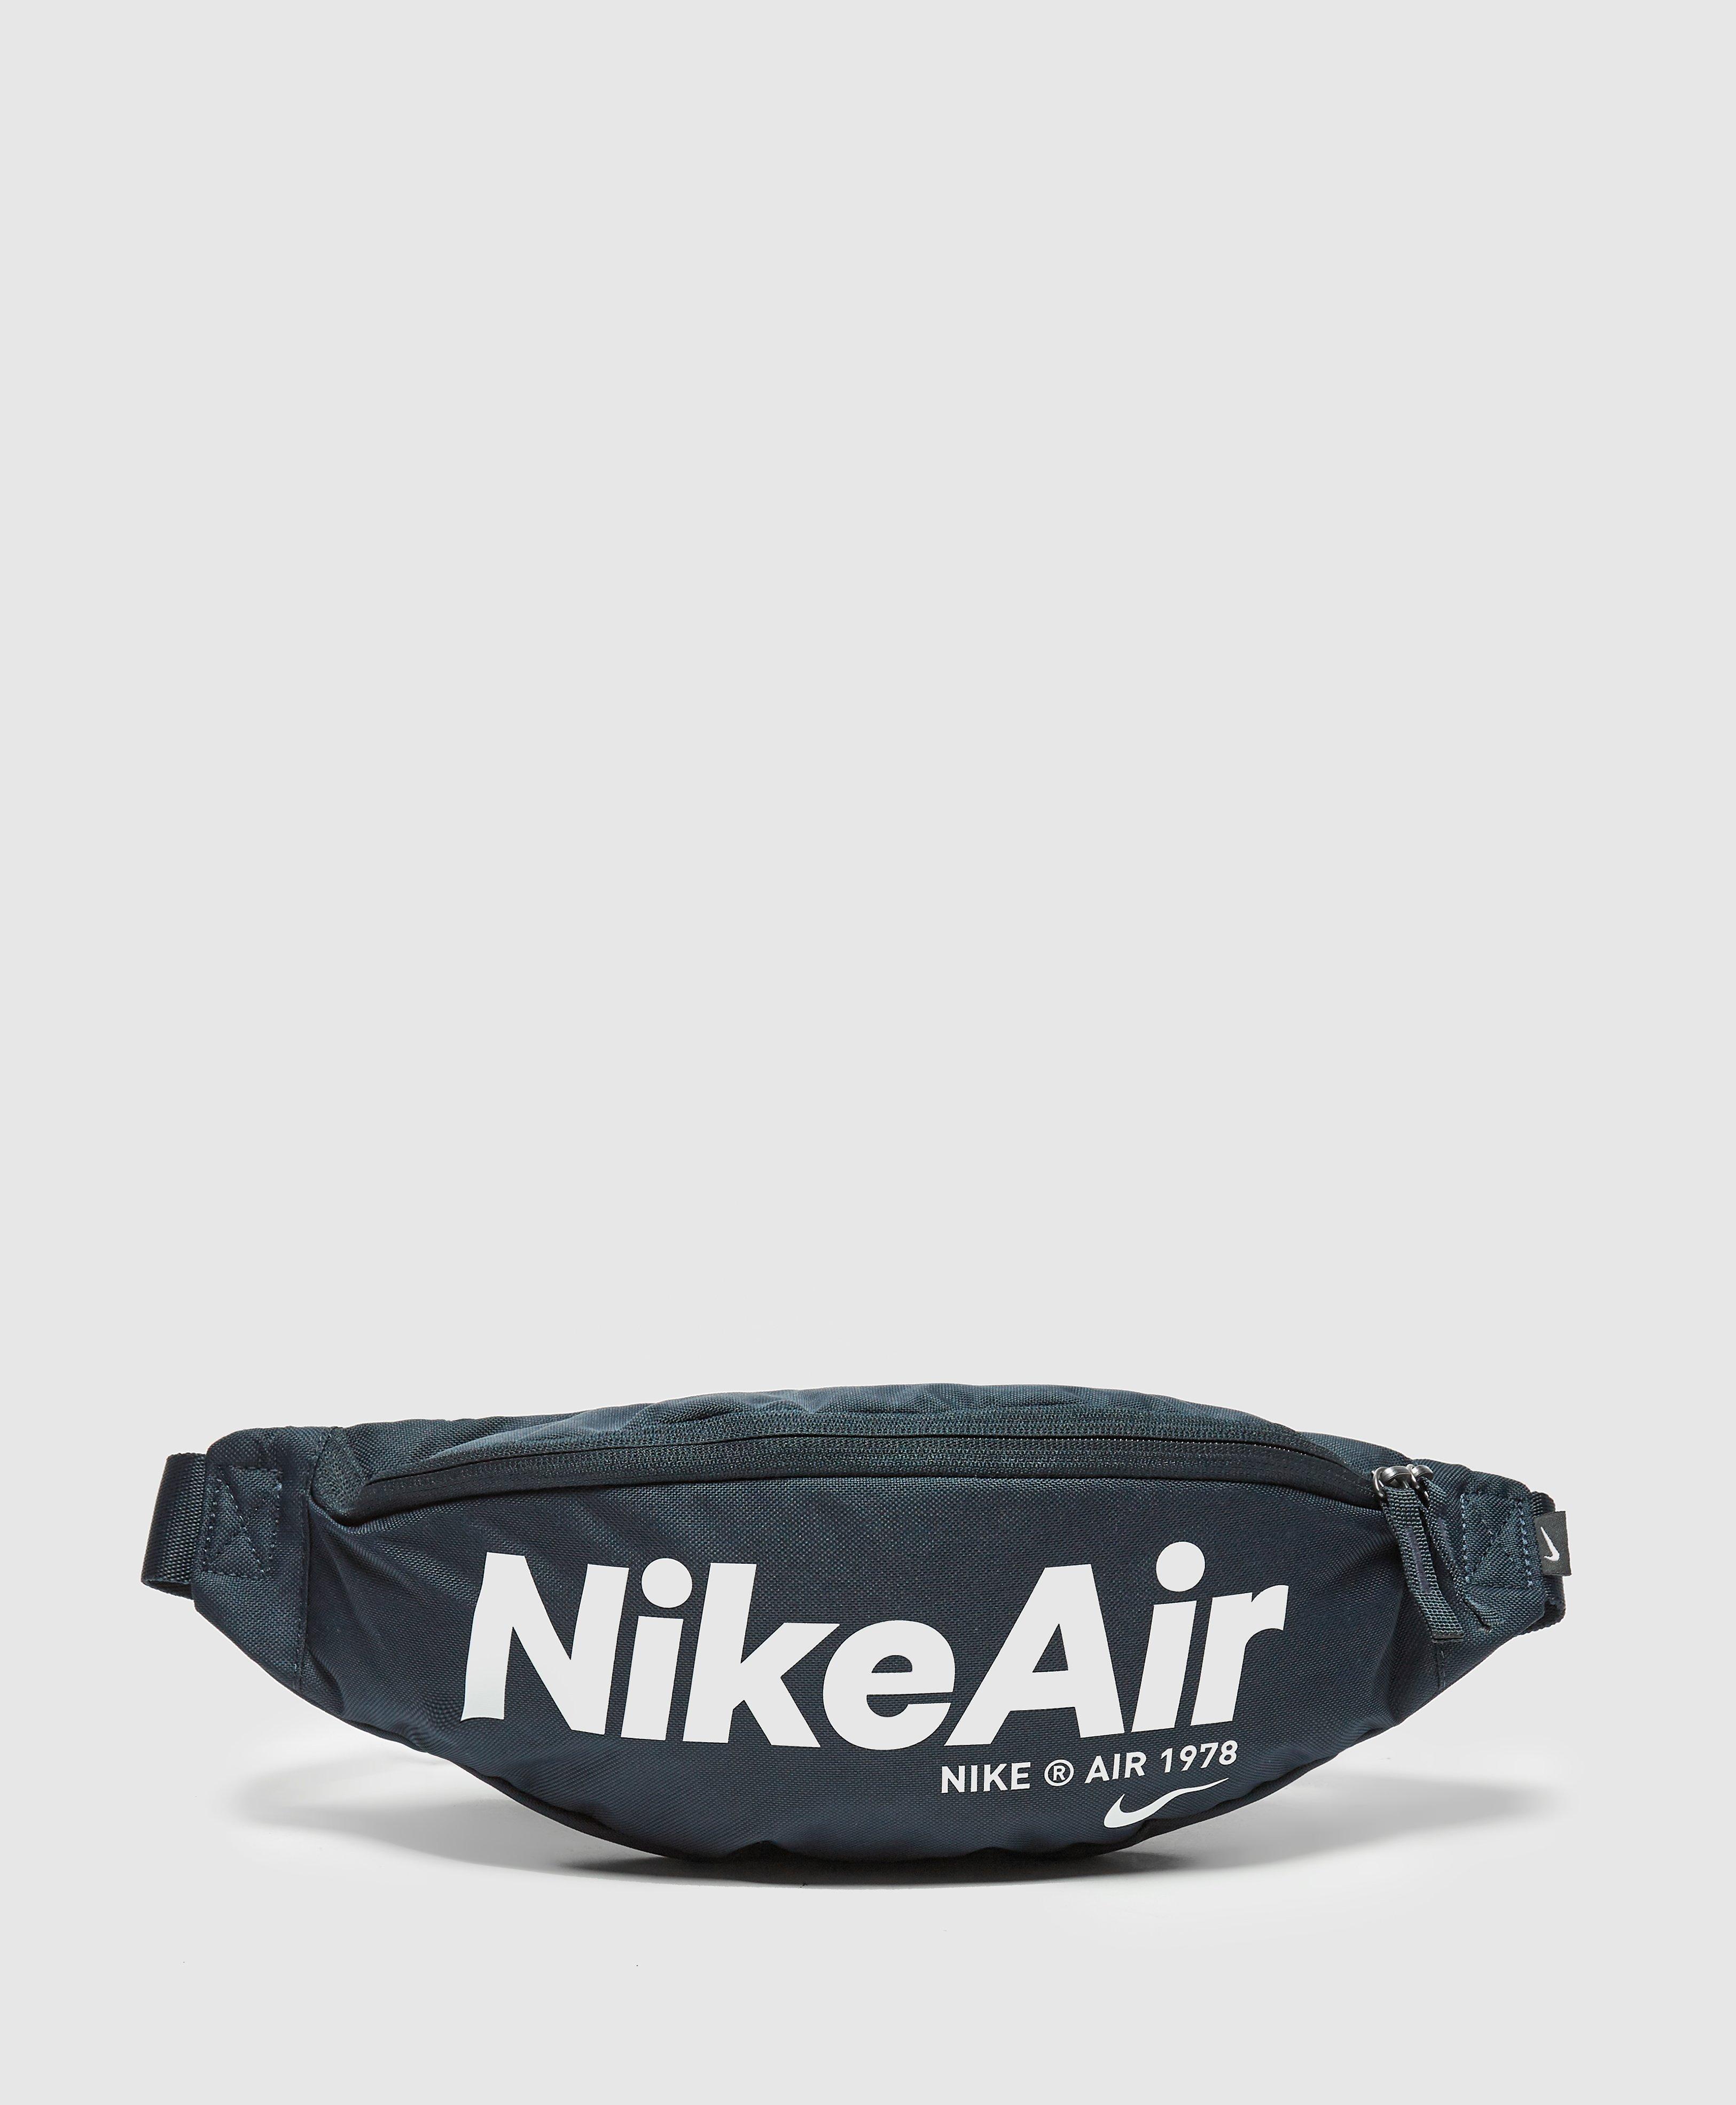 Nike Synthetic Air Waist Bag in Blue for Men - Lyst